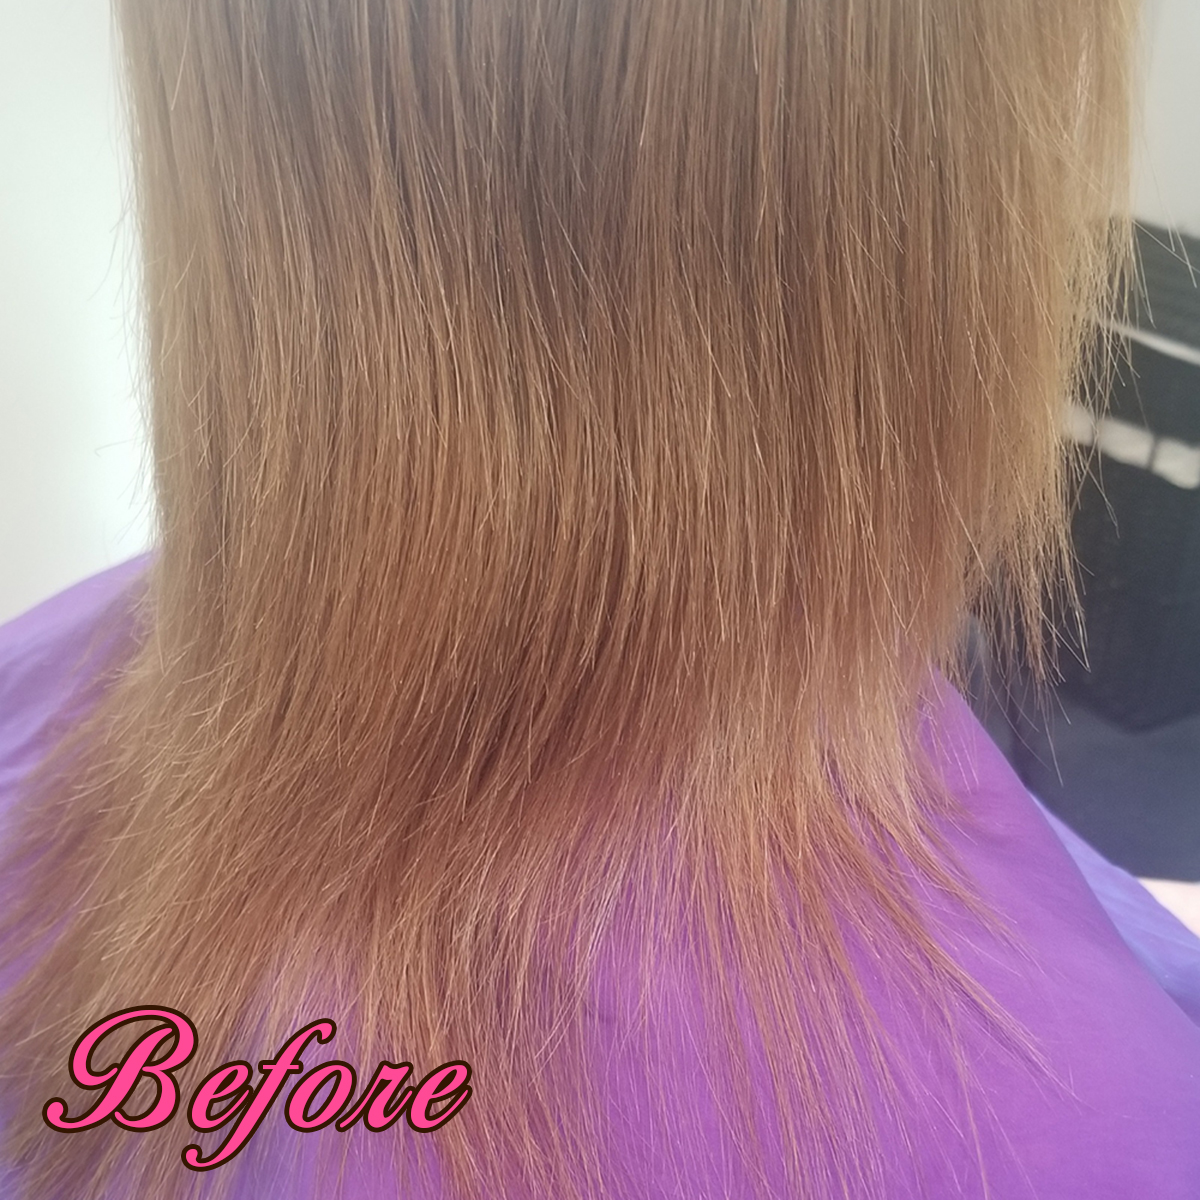 Gallery 106 - Before - Hair Extensions by Gricelda